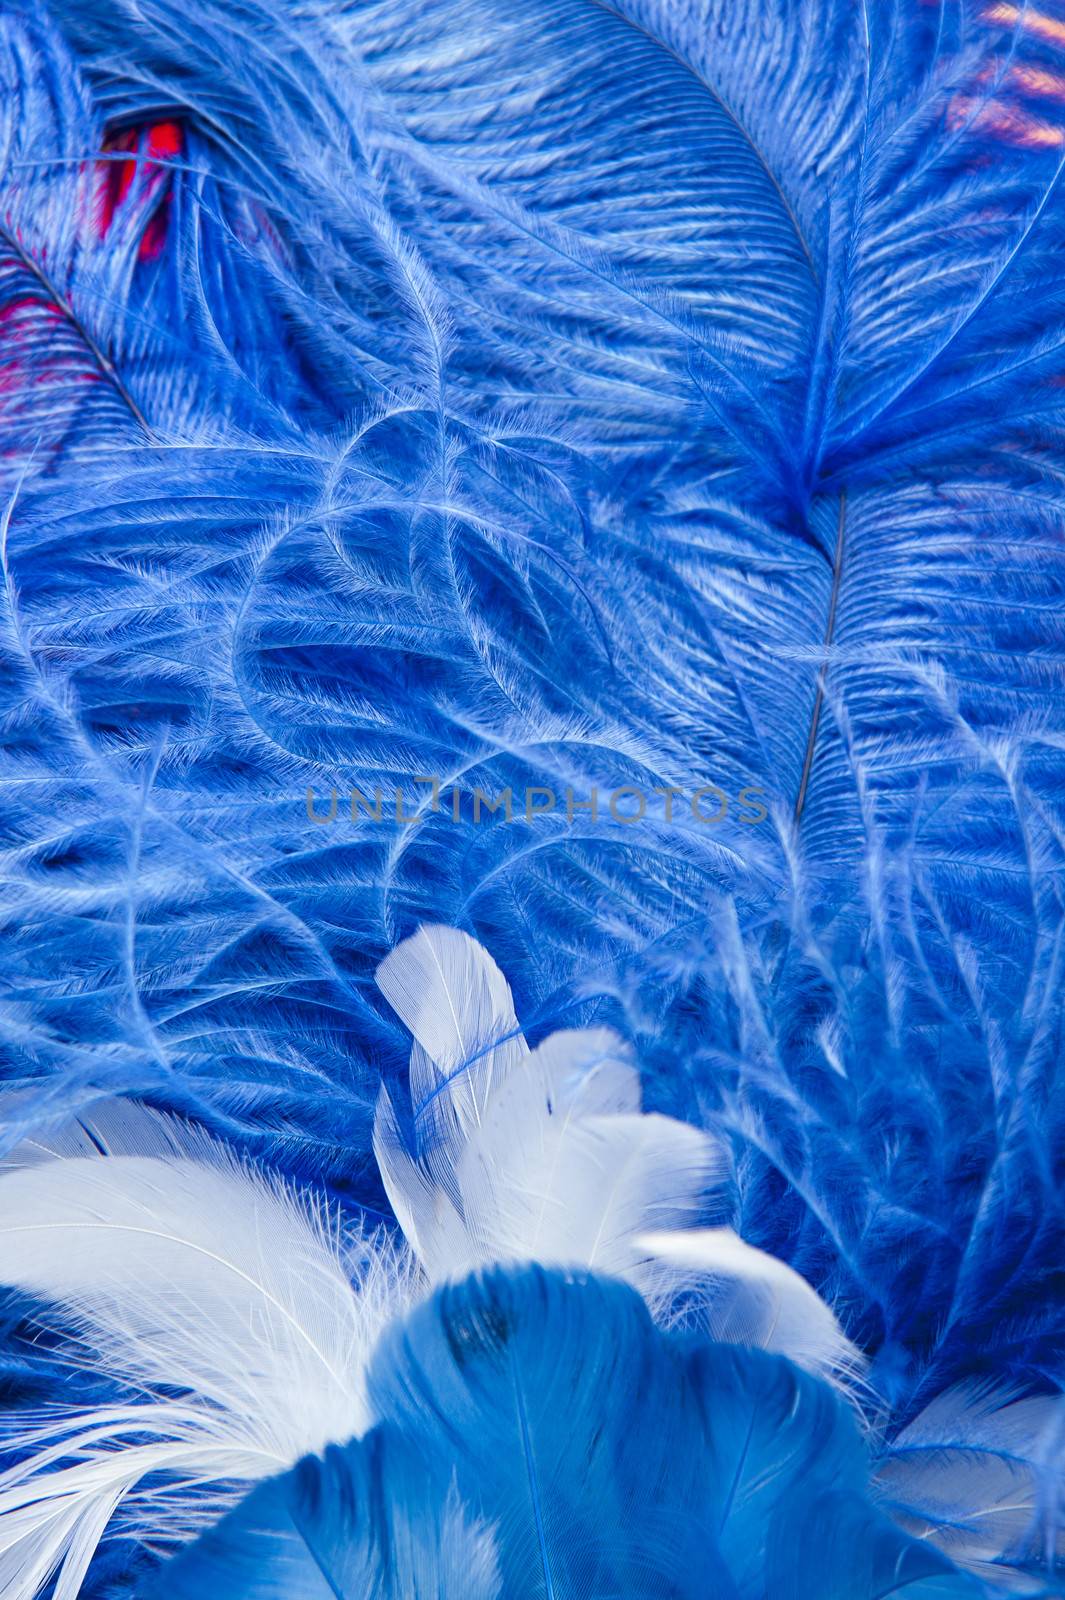 Blue feather by cla78